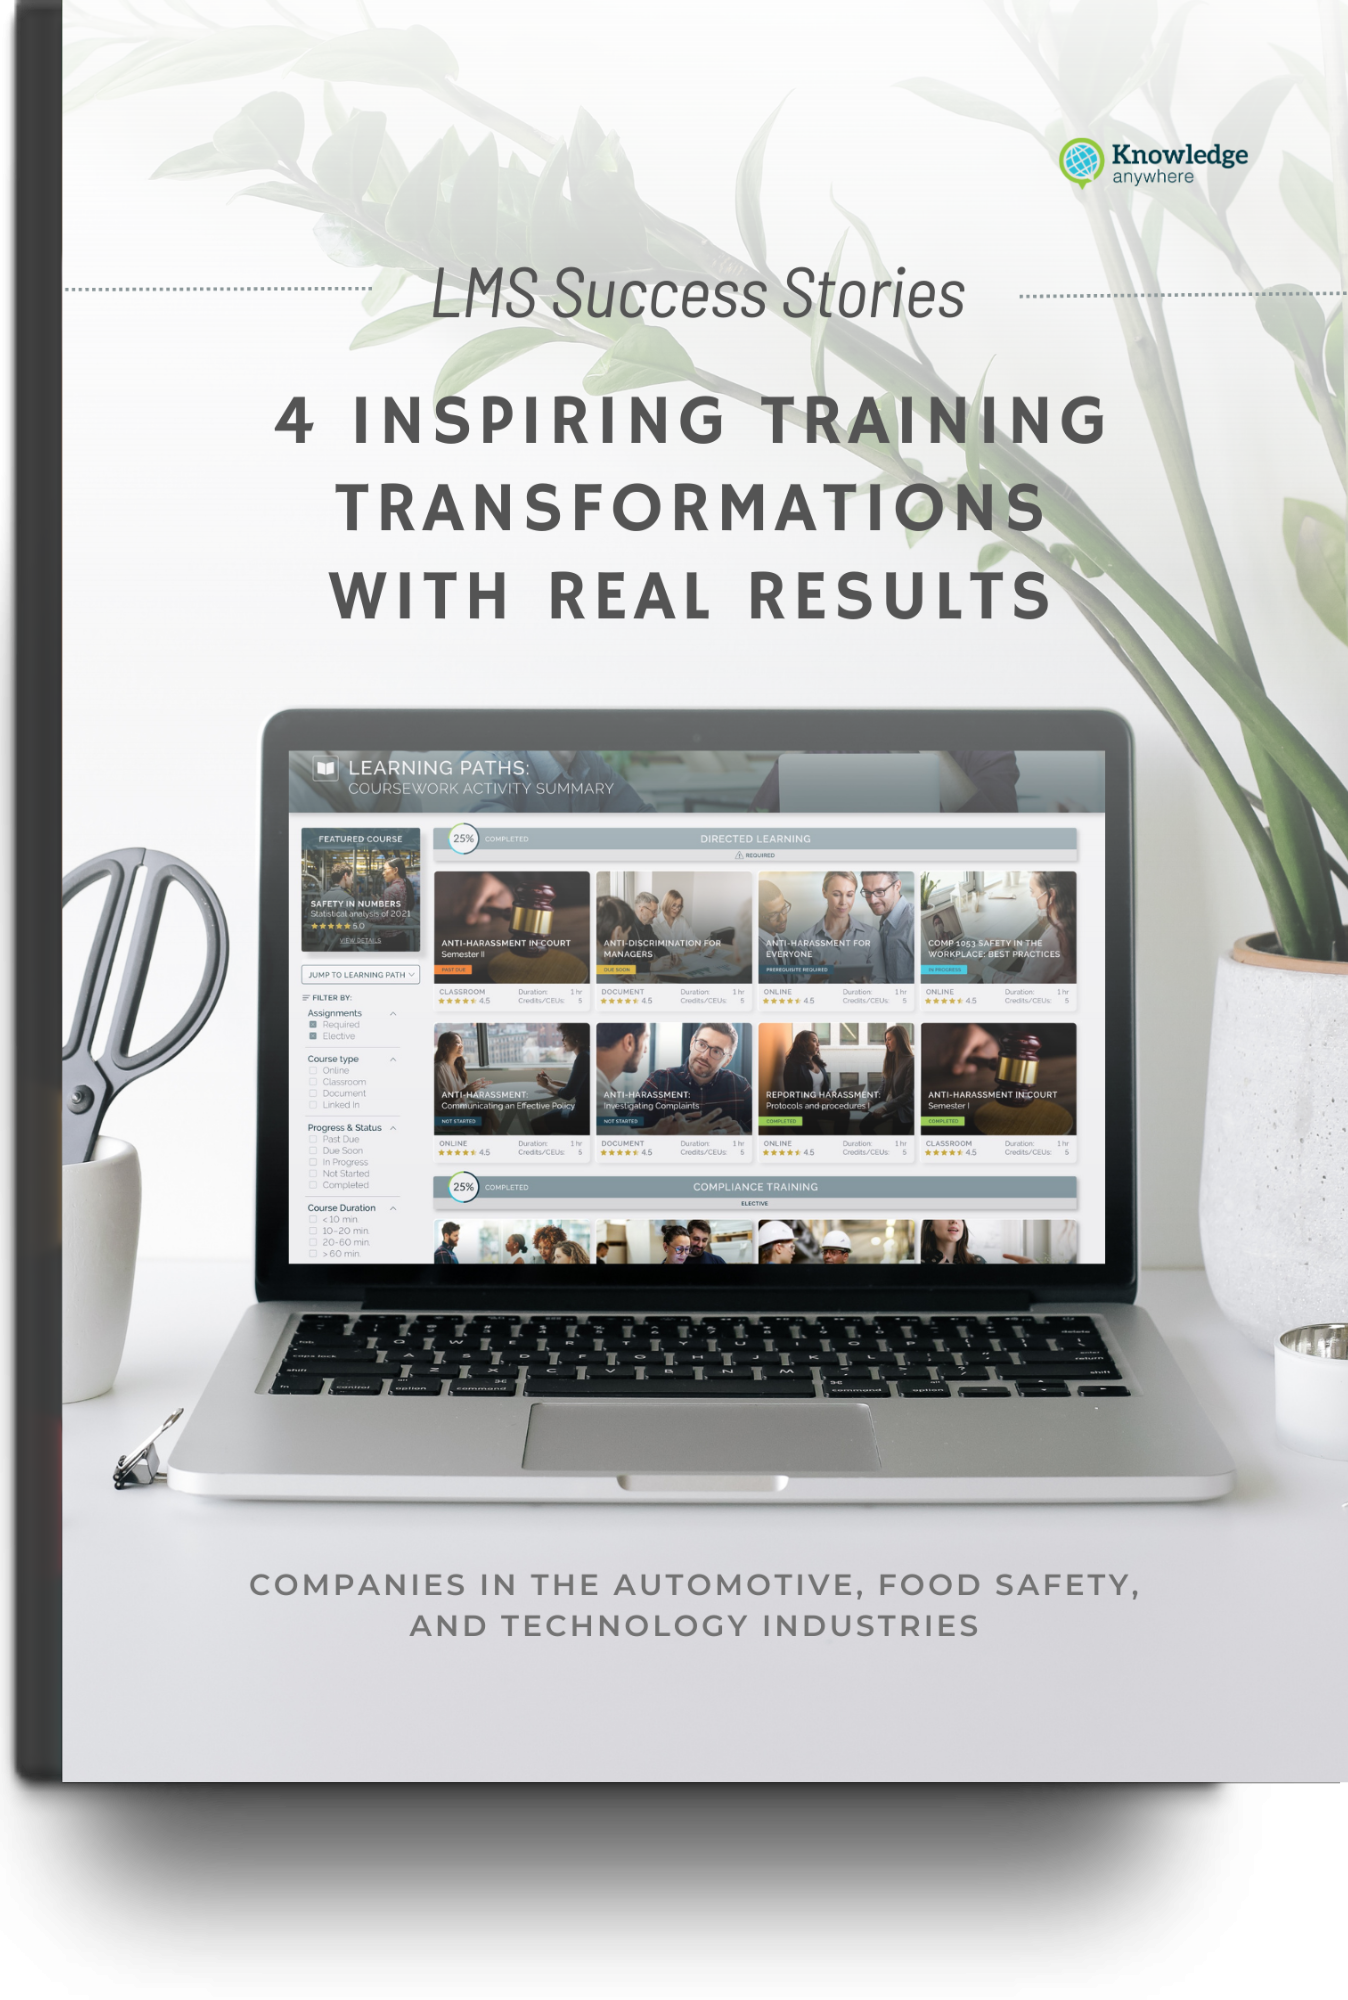 LMS Success Stories, 4 Inspiring Training Transformations with Real Results